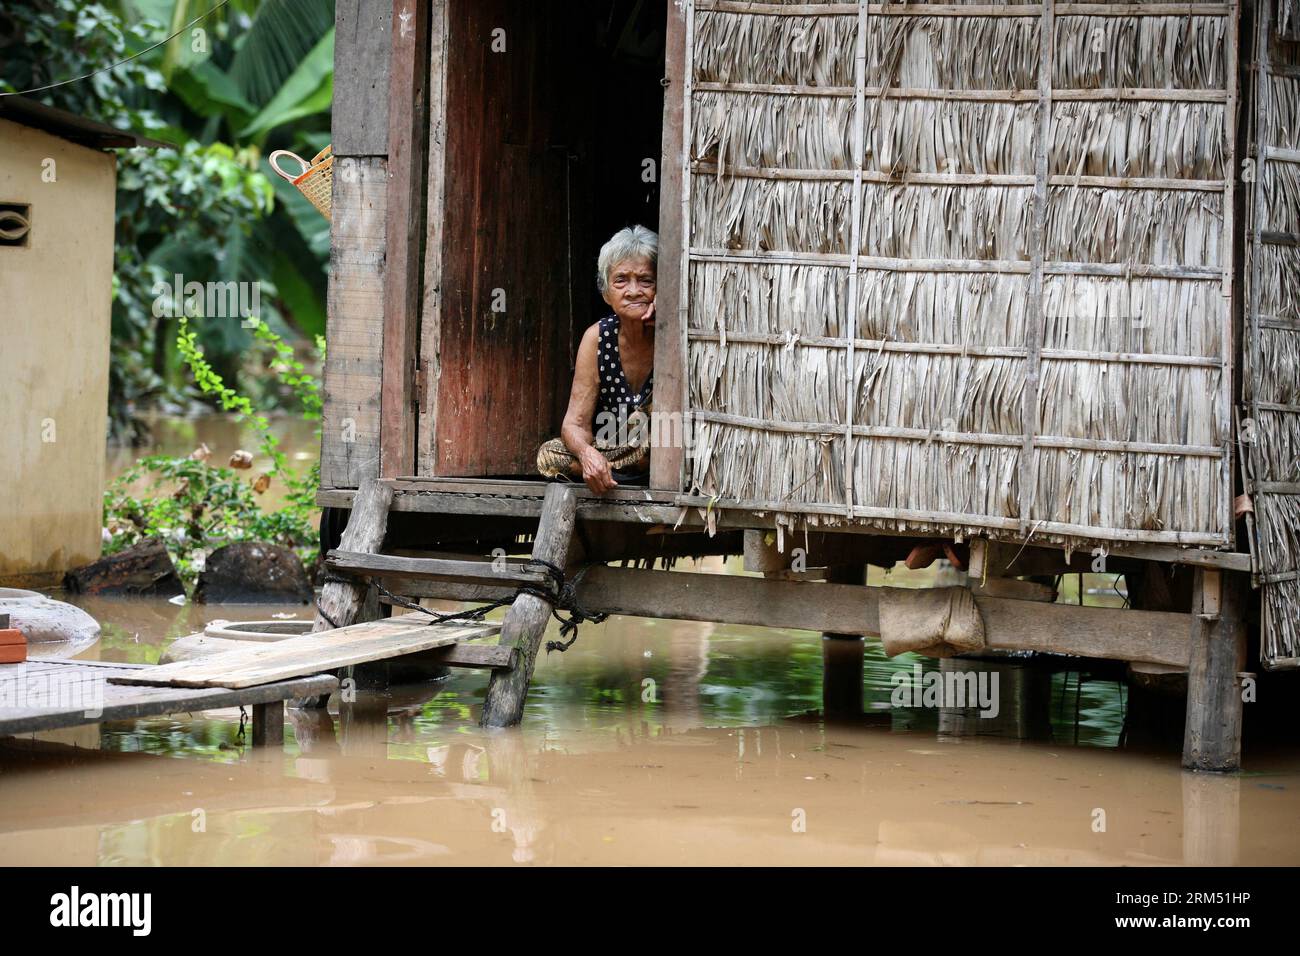 Bildnummer: 60549800  Datum: 01.10.2013  Copyright: imago/Xinhua (131001) -- PHNOM PENH, Oct. 1, 2013 (Xinhua) -- A woman sits inside her flooded house in southern Cambodia s Kandal province, Oct. 1, 2013. At least 30 in Cambodia have died of drowning in less than three weeks due to Mekong River and flash floods, Keo Vy, chief of the Cabinet of the National Committee for Disaster Management, said. The floods have forced more than 9,000 families to flee their homes and inundated nearly 100,000 hectares of rice paddy. (Xinhua/Phearum) CAMBODIA-KANDAL-FLOOD PUBLICATIONxNOTxINxCHN Gesellschaft Hoc Stock Photo